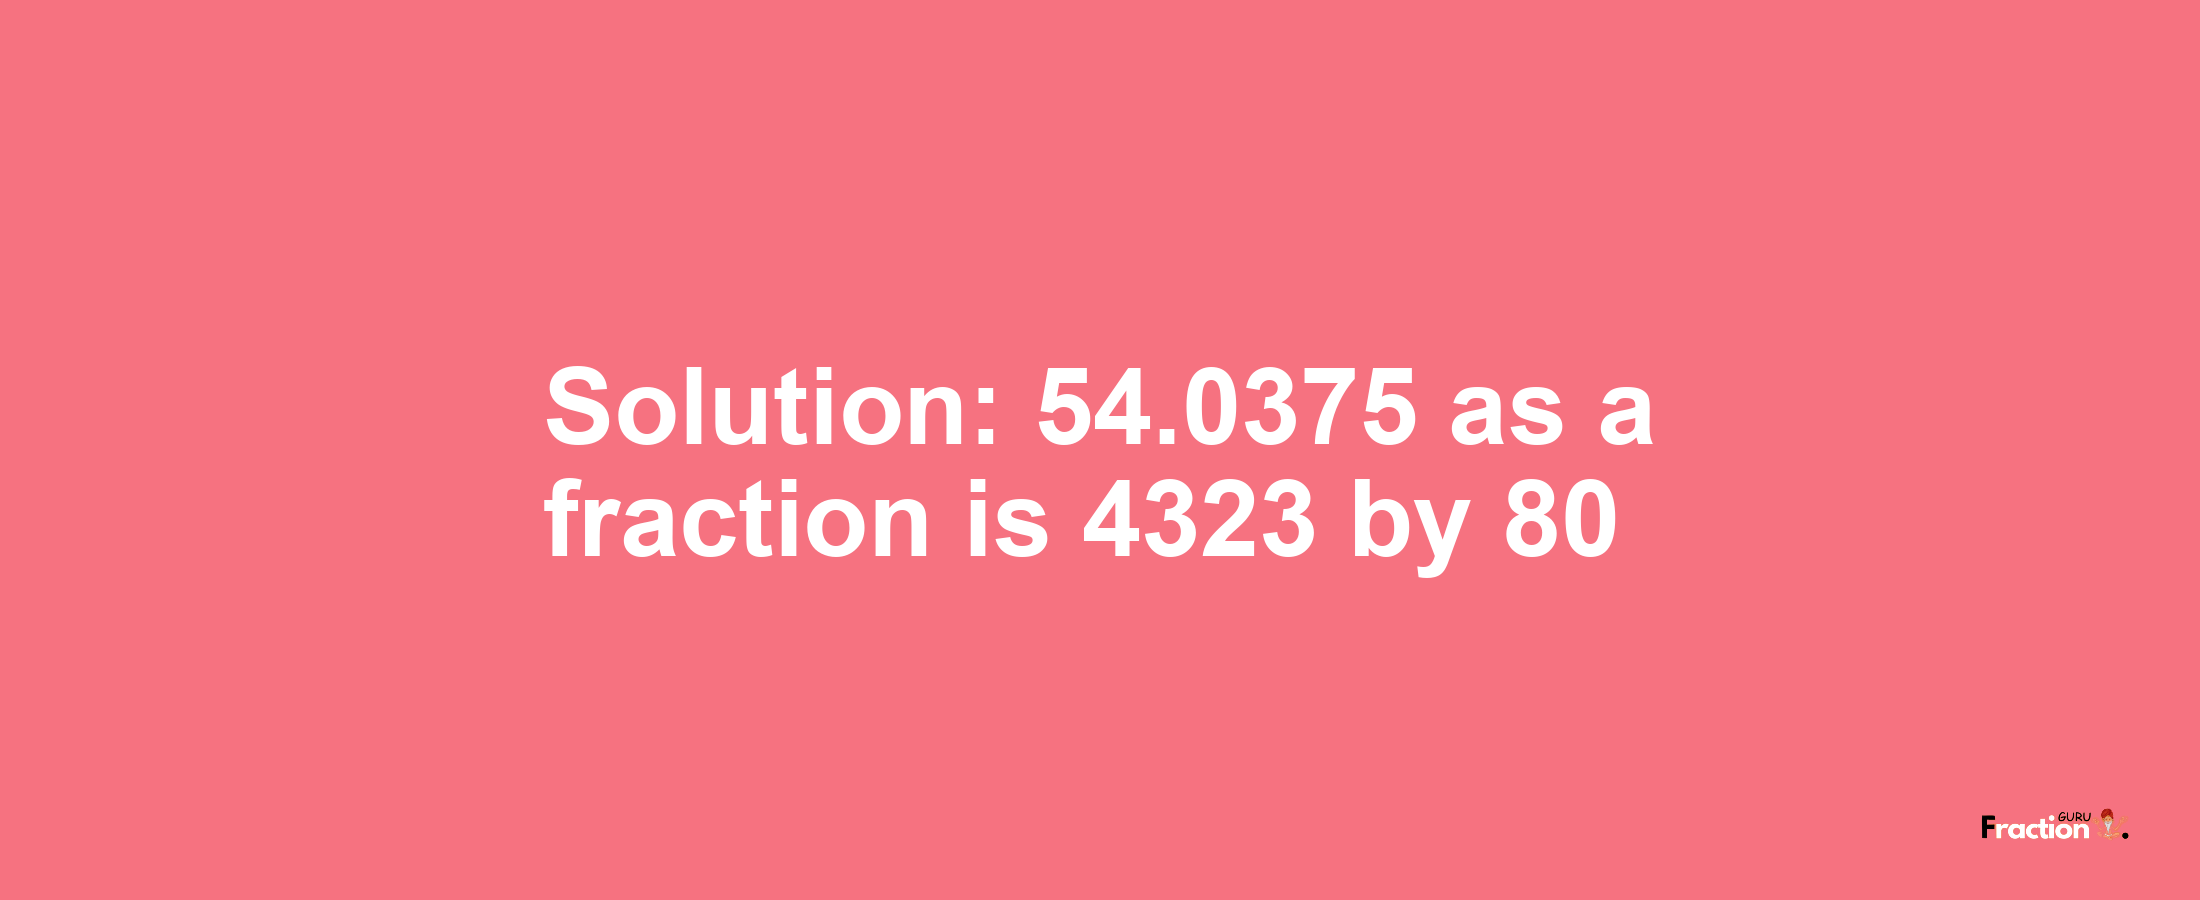 Solution:54.0375 as a fraction is 4323/80